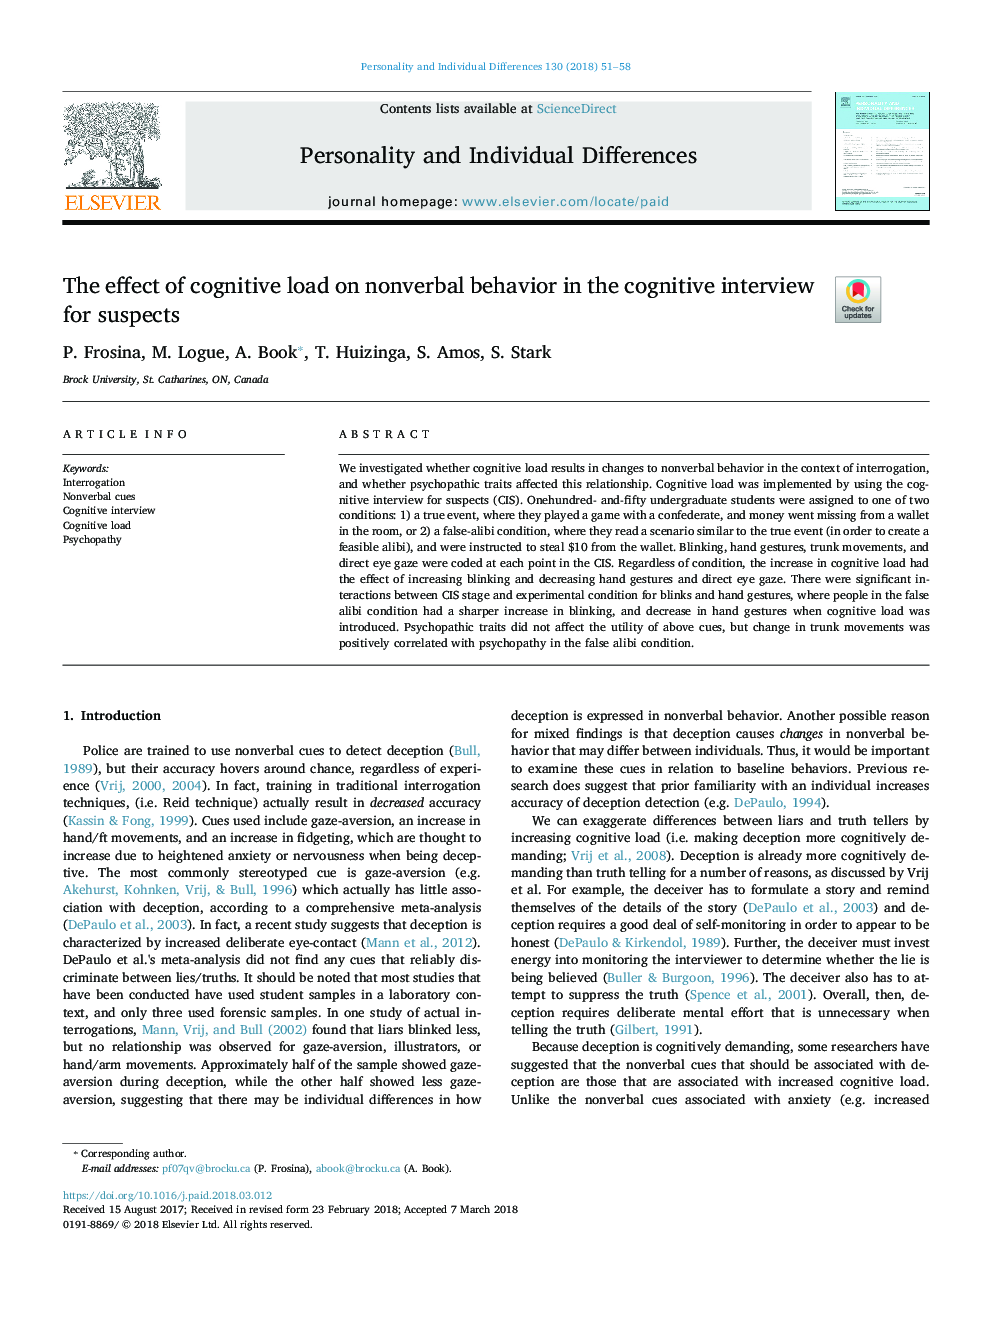 The effect of cognitive load on nonverbal behavior in the cognitive interview for suspects